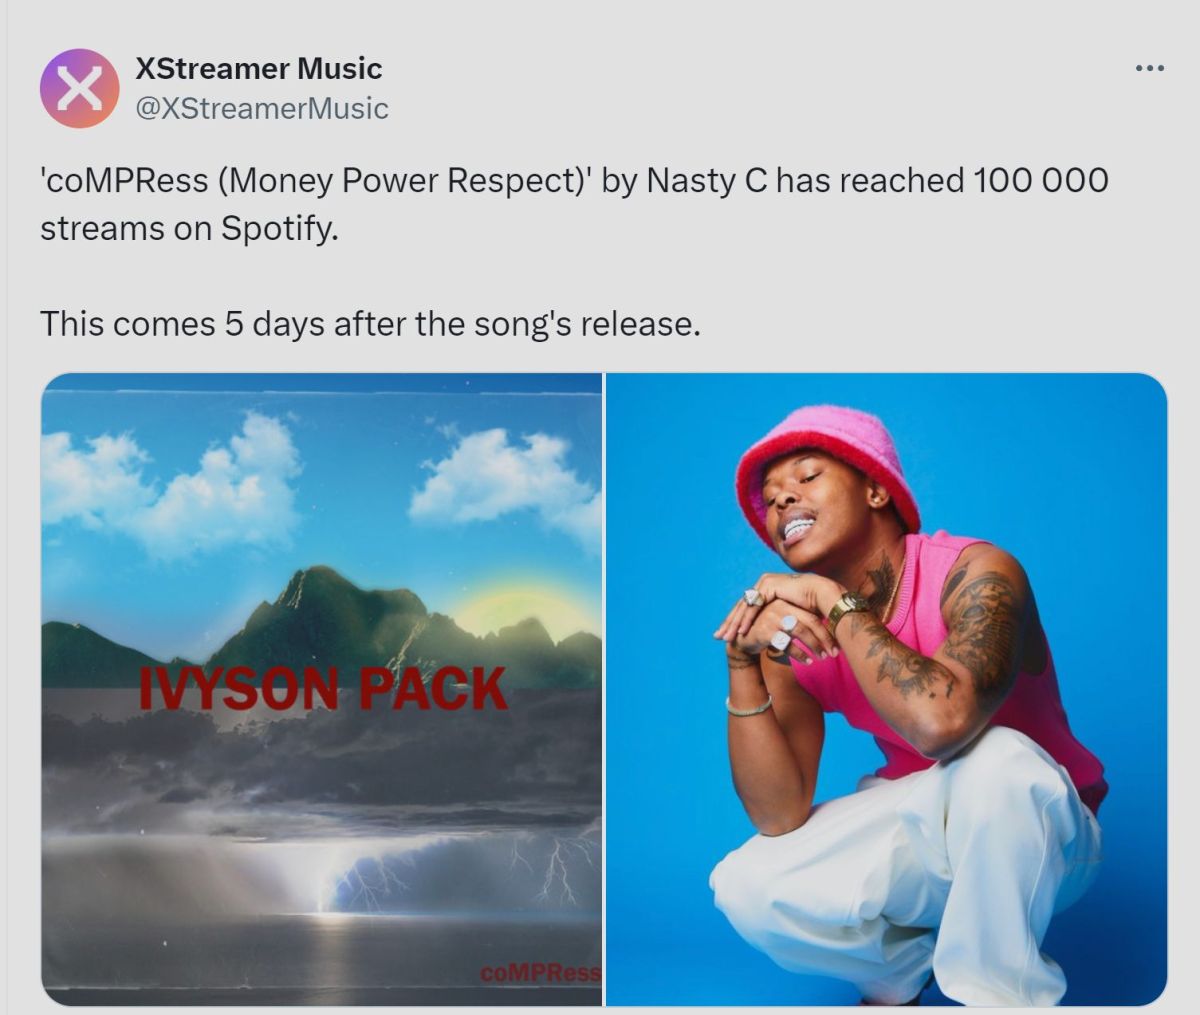 Nasty C'S &Quot;Compress&Quot; Achieves Streaming Success On Spotify Within Days Of Release 3